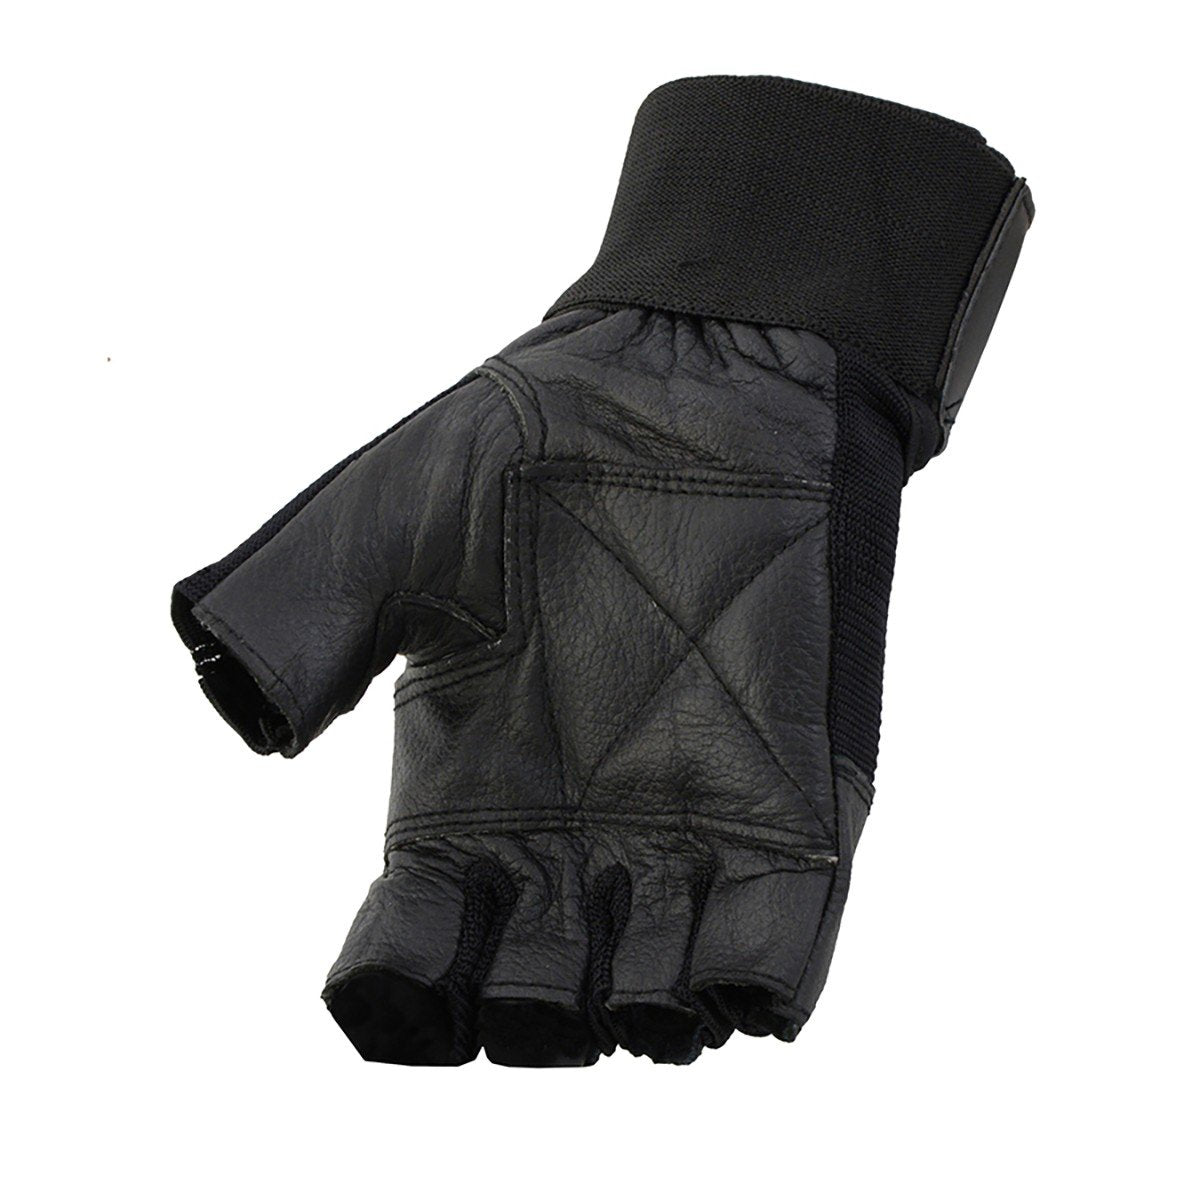 Milwaukee Leather MG7562 Men's Black Leather and Spandex Gel Padded Palm Fingerless Motorcycle Hand Gloves W/ Mesh Material